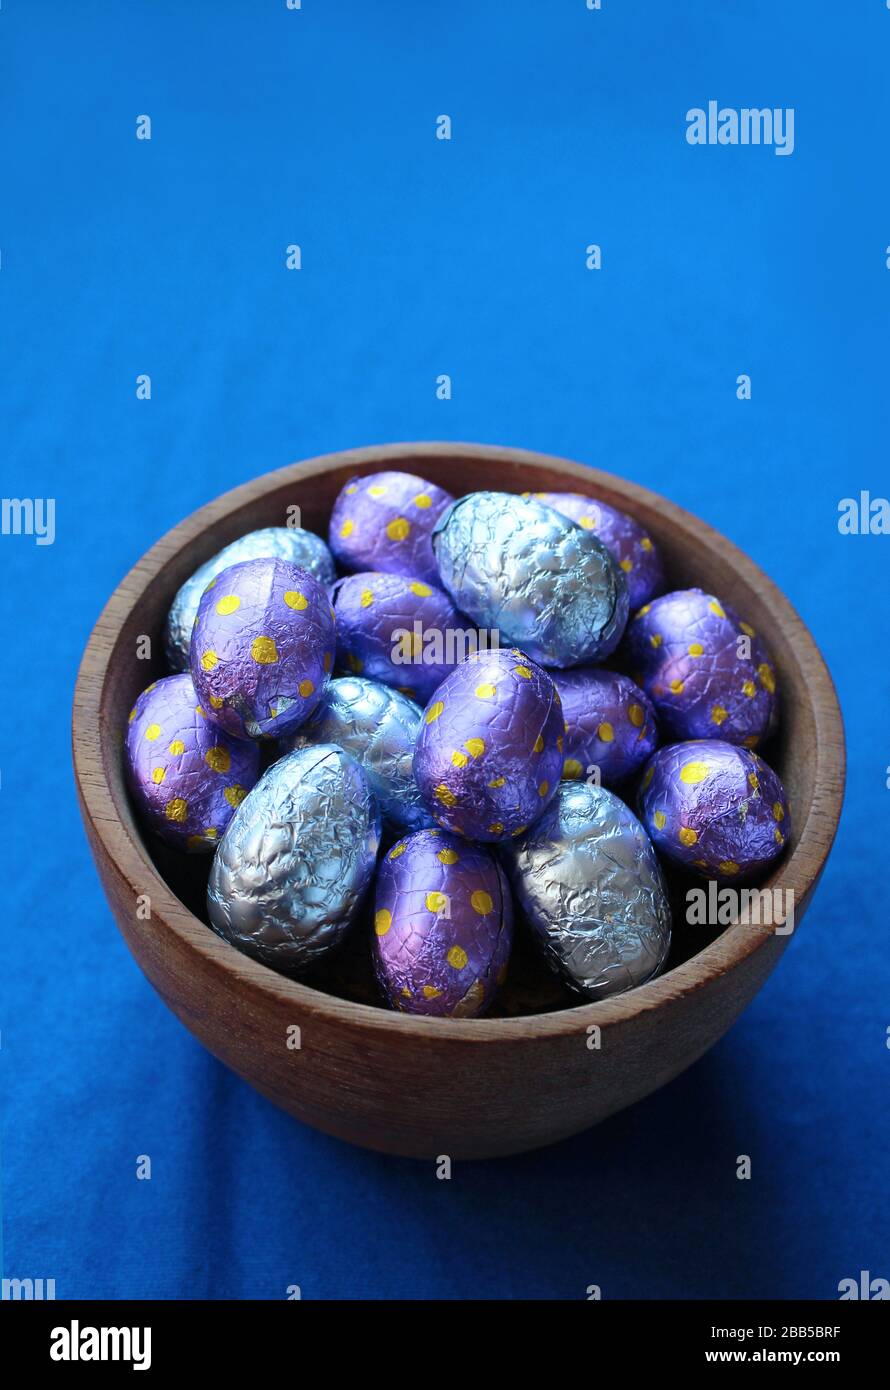 A wooden bowl filled with colorful chocolate Easter eggs in foil wrappings, with a blue table cloth background. High angle view and copy space above. Stock Photo